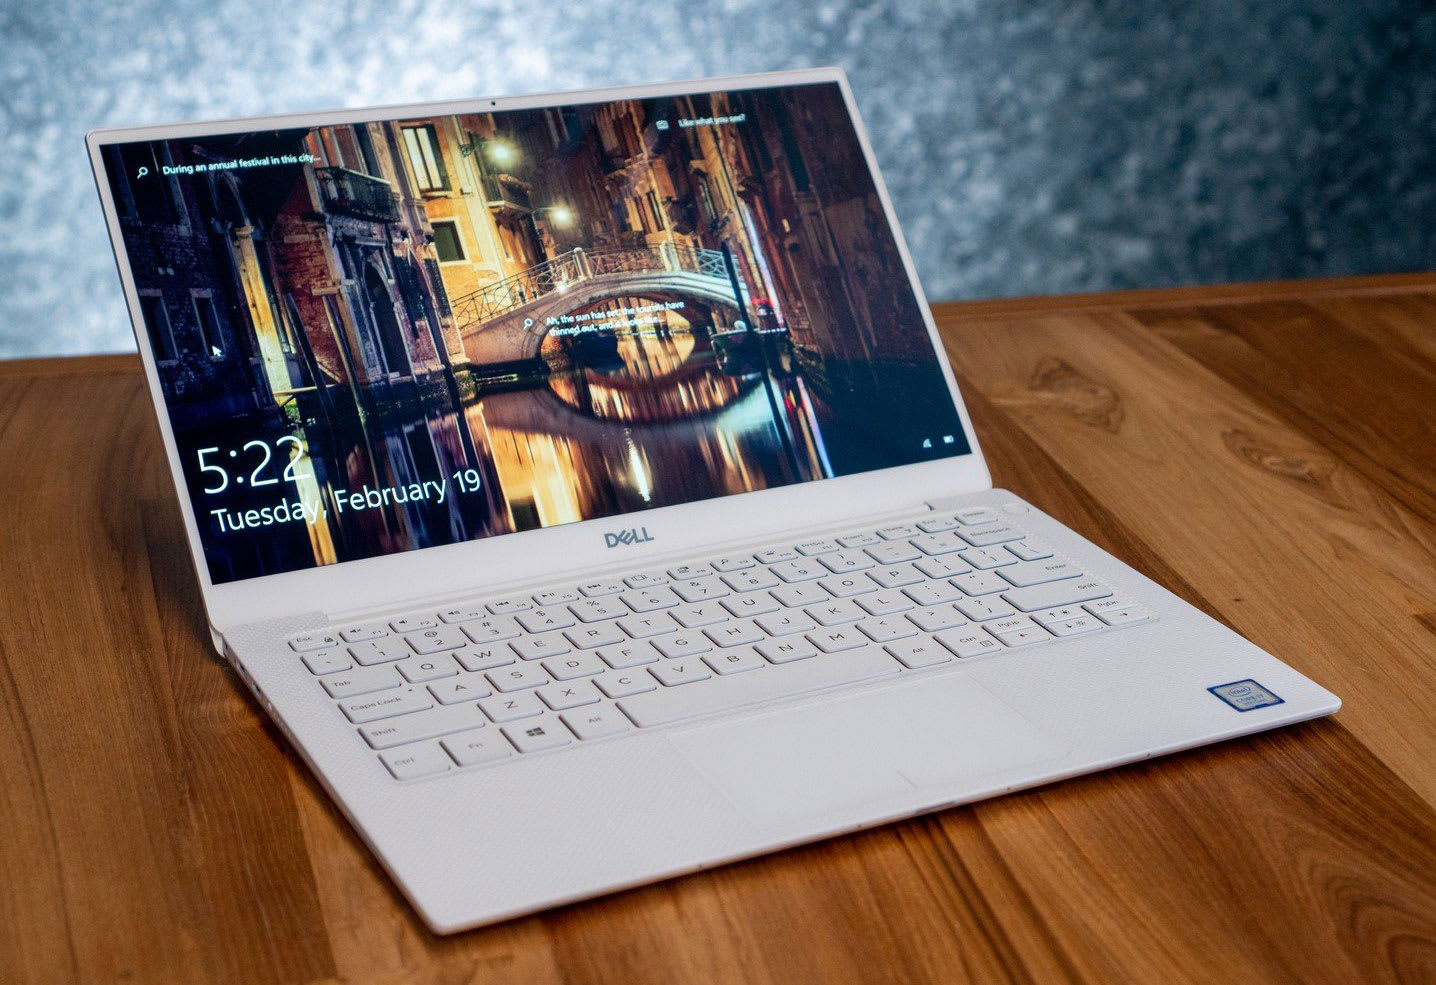 Dell XPS 13 review: A perfect ultraportable